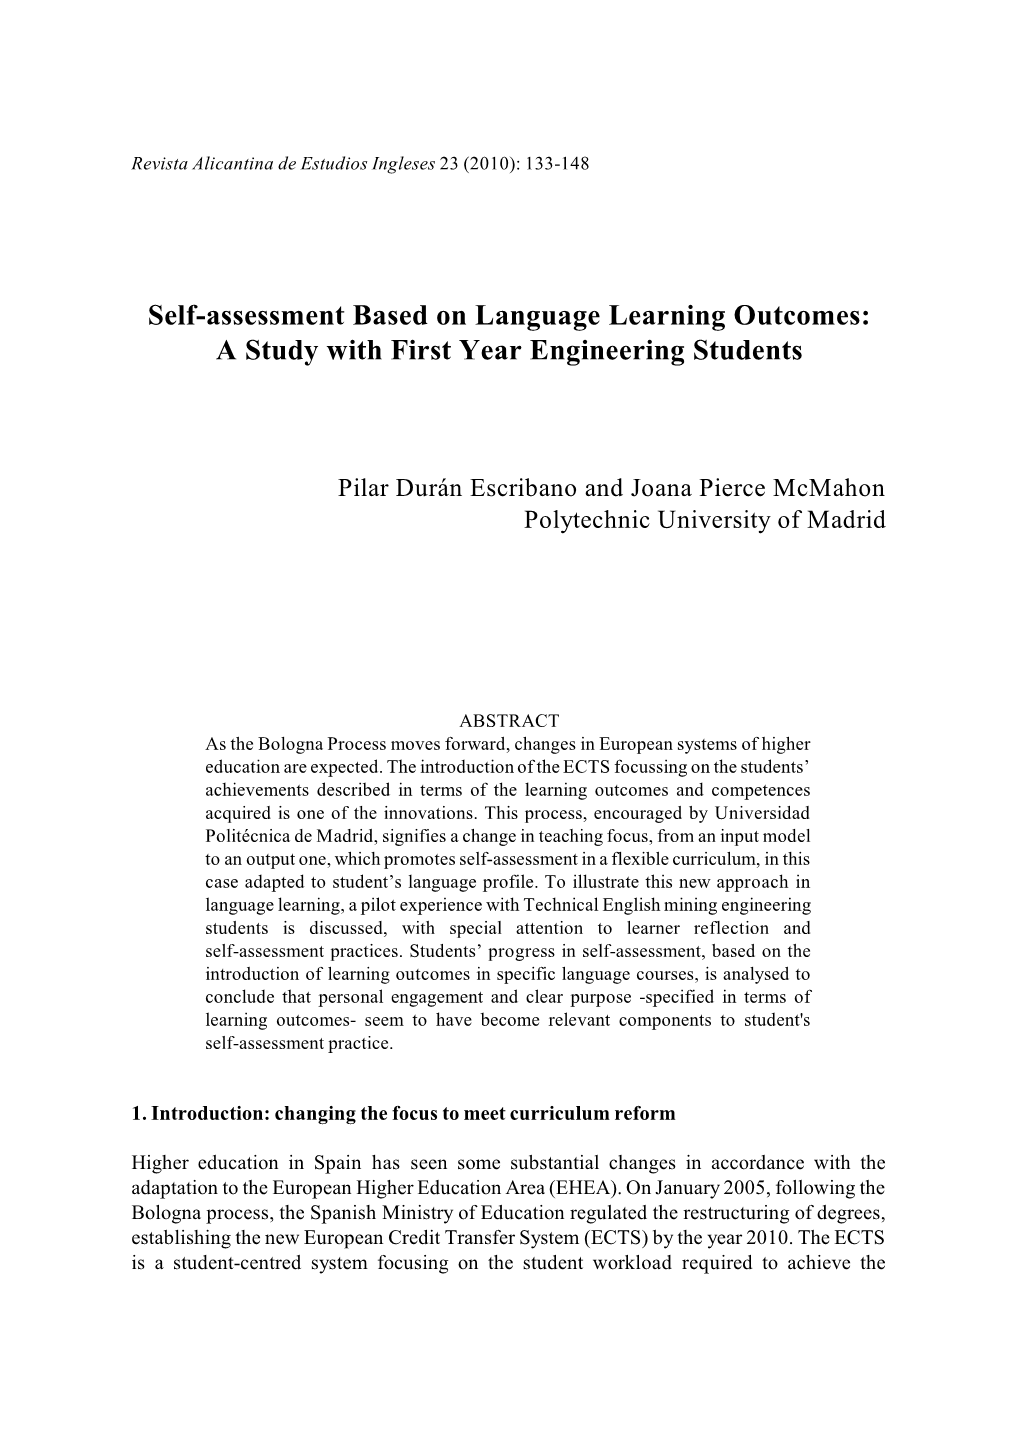 Self-Assessment Based on Language Learning Outcomes: a Study with First Year Engineering Students